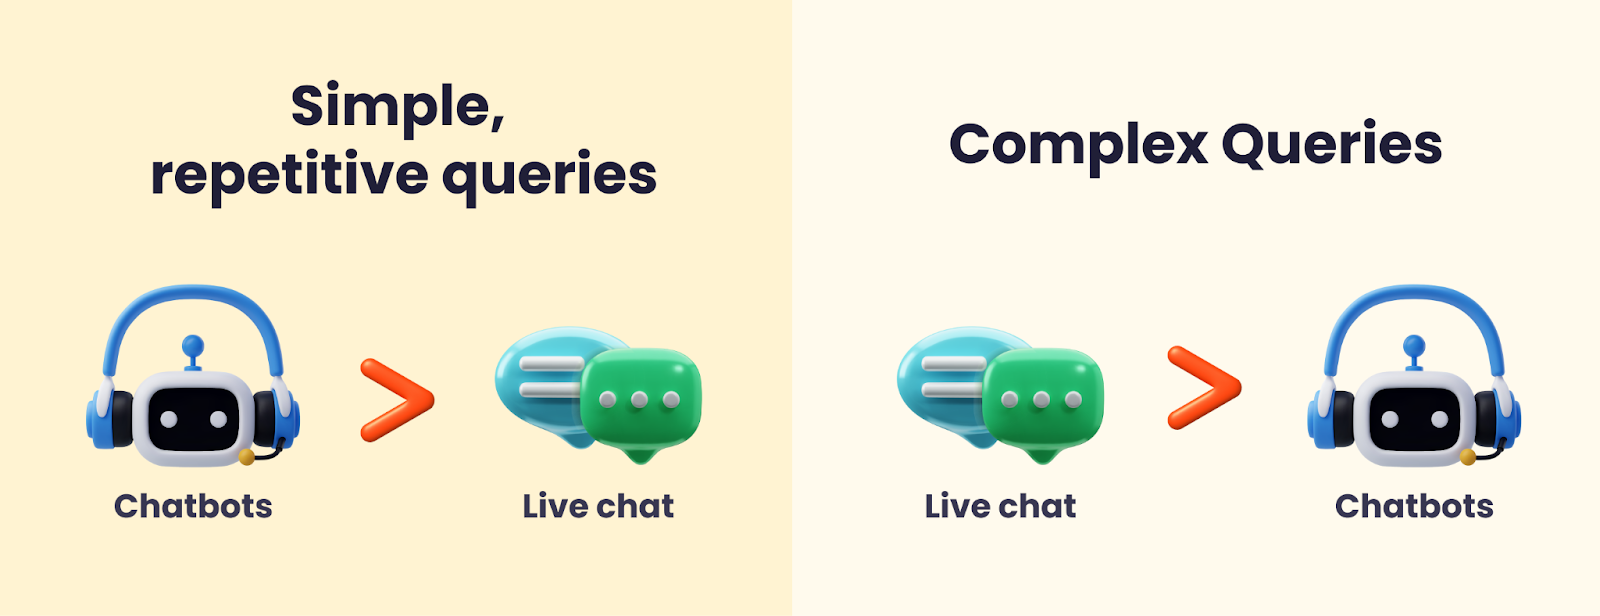 comparing-chatbot-vs-livechat-on-the-basis-of-nture-of-queries